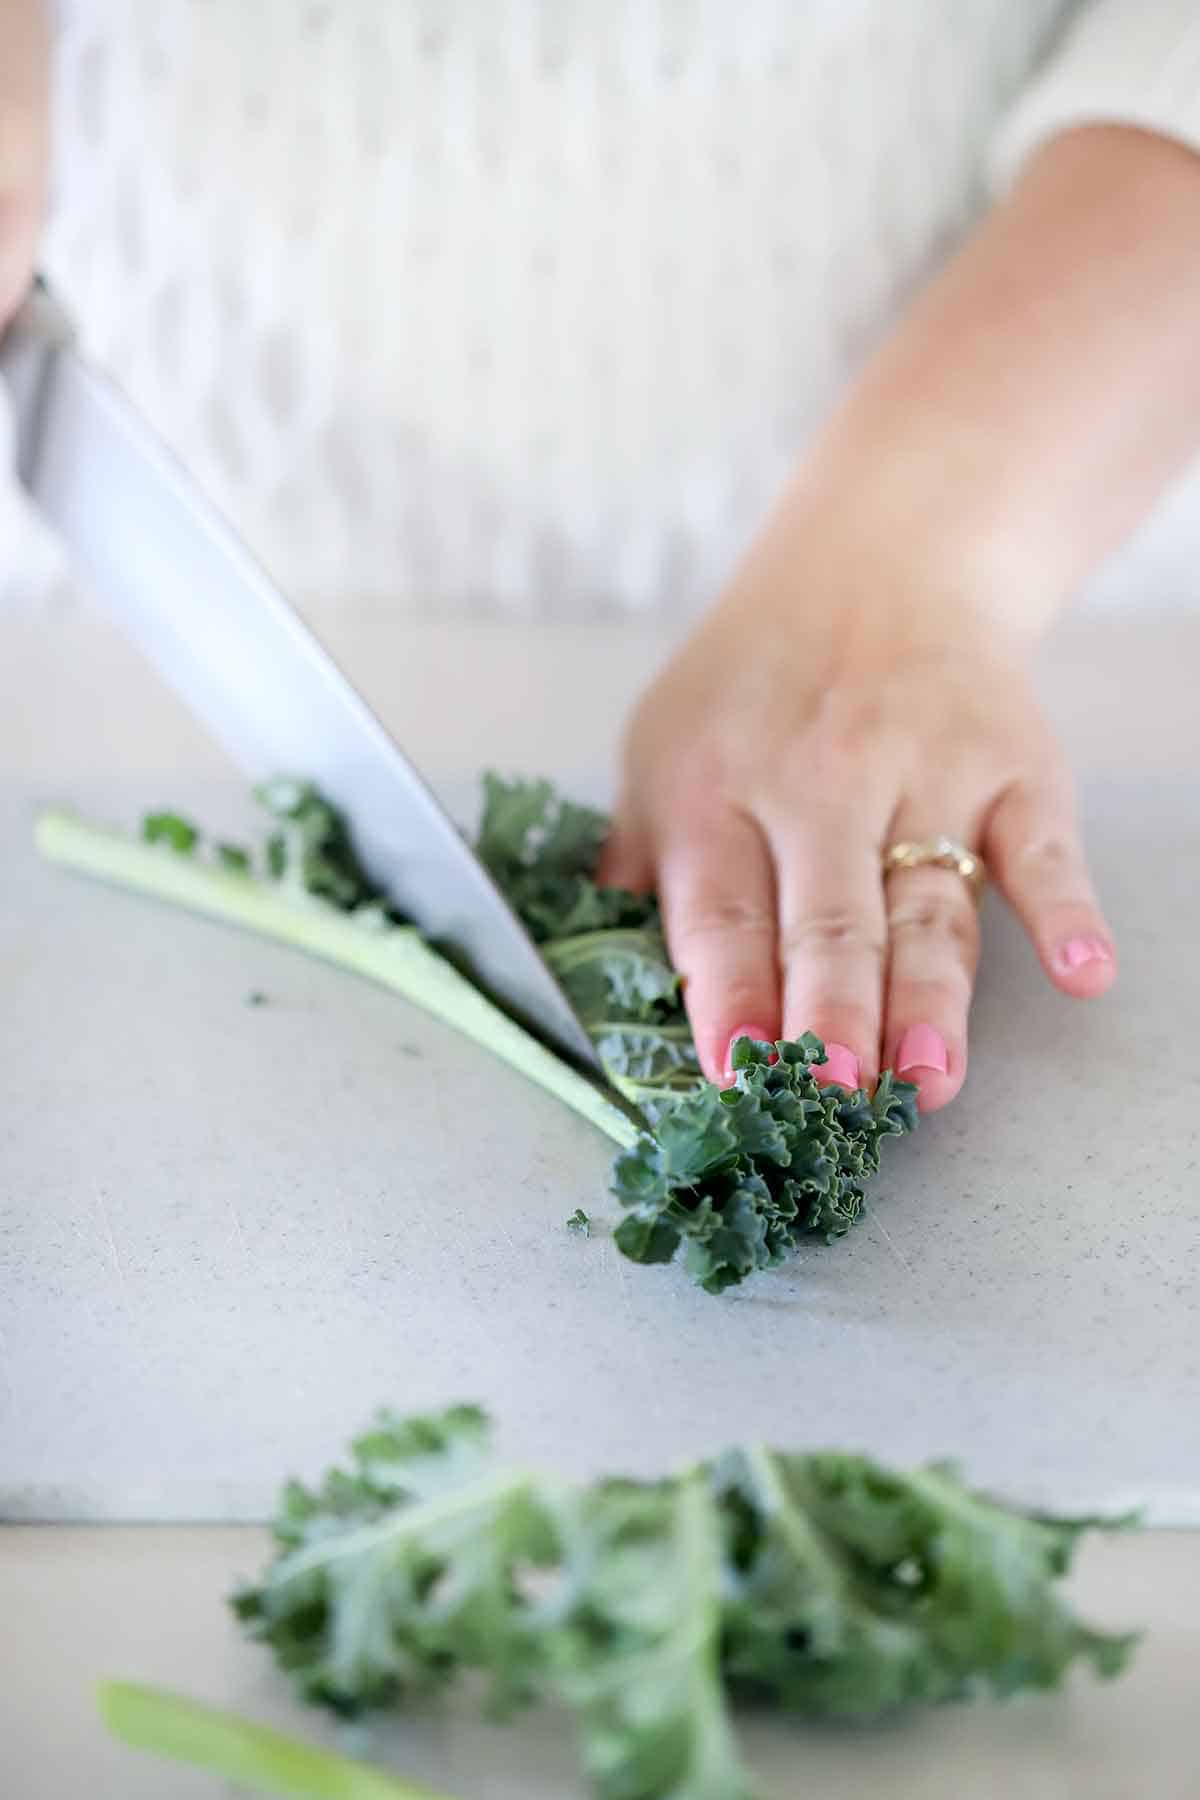 Cutting the stem off curly kale with a knife.